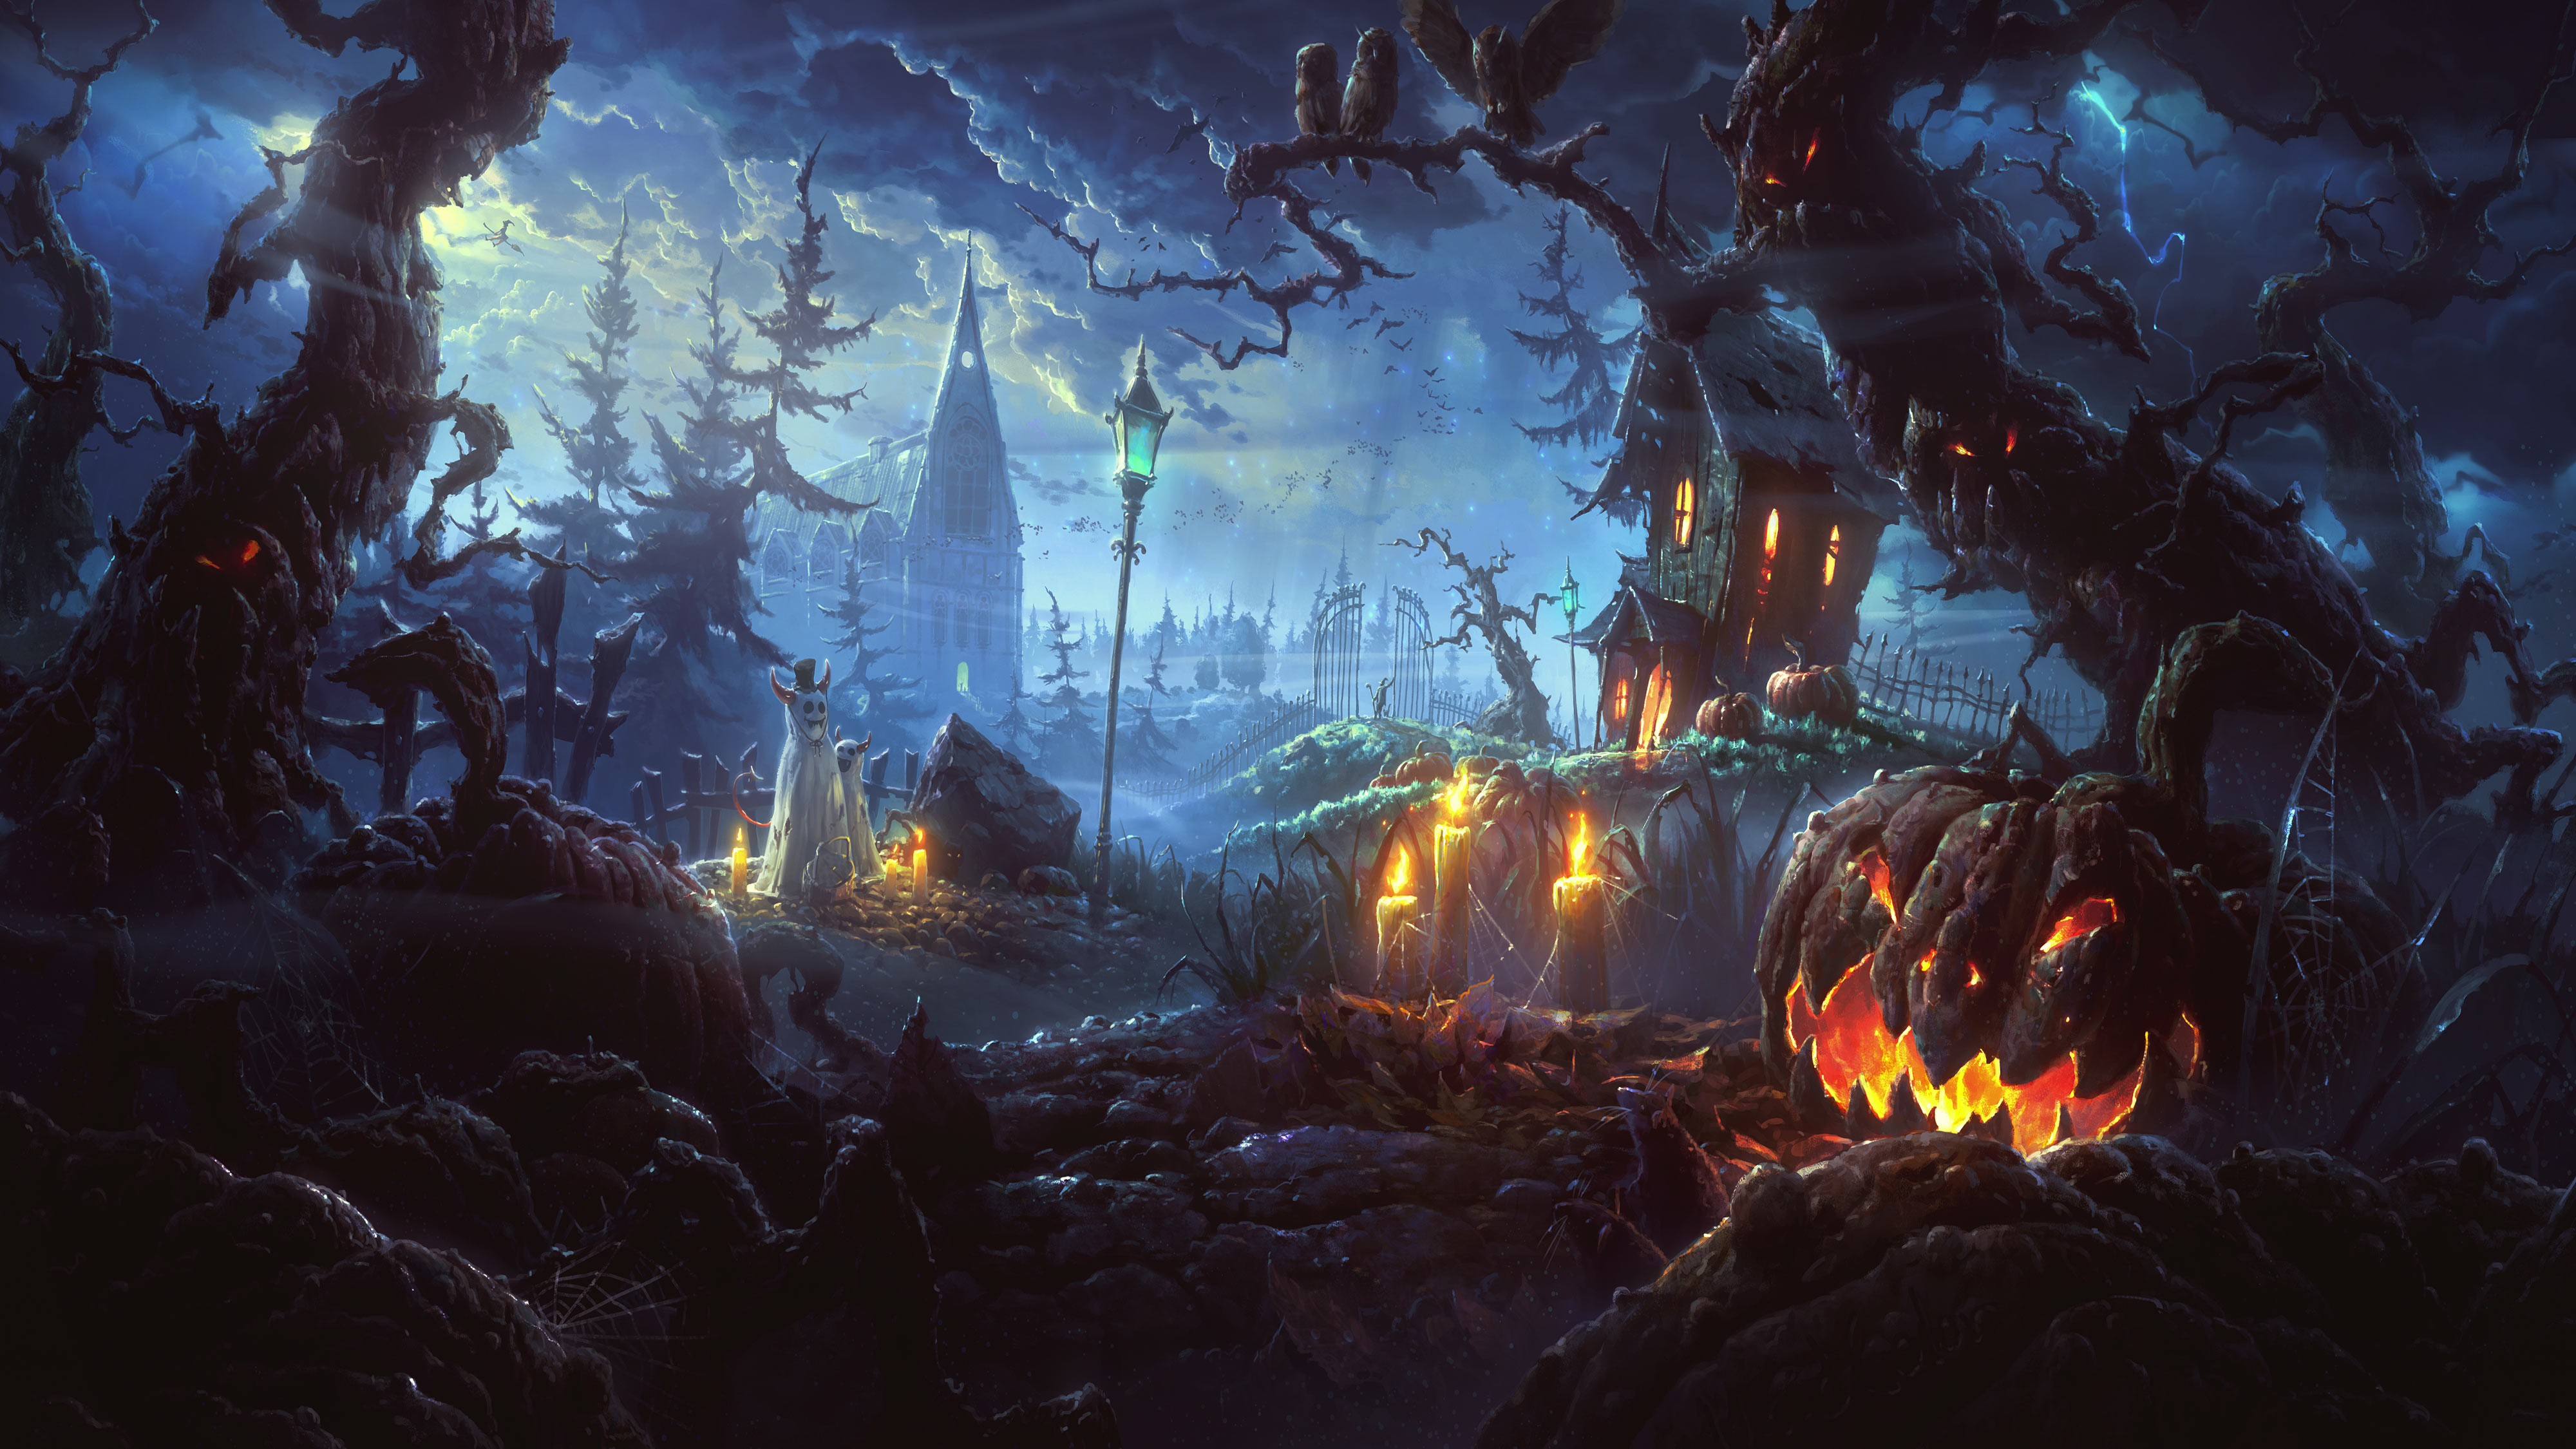 Gallery For gt Halloween Backgrounds For Computer